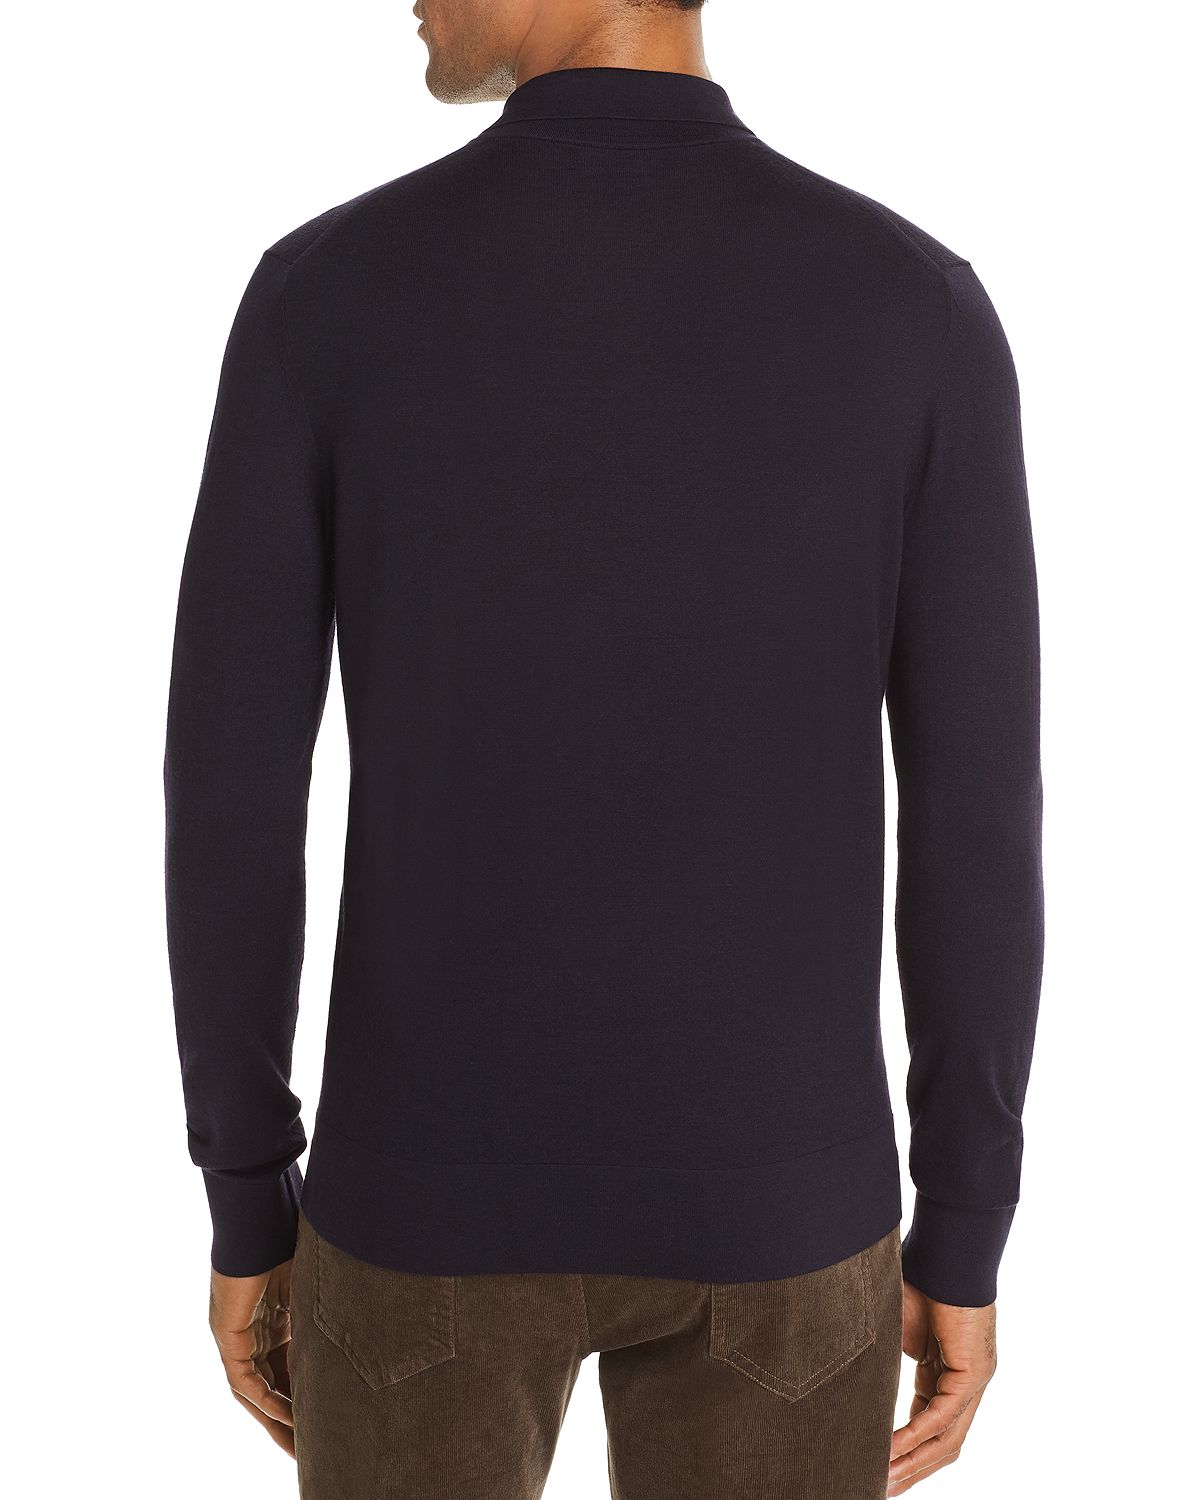 The Men's Store Long-sleeve Knit Classic Fit Polo Shirt Navy